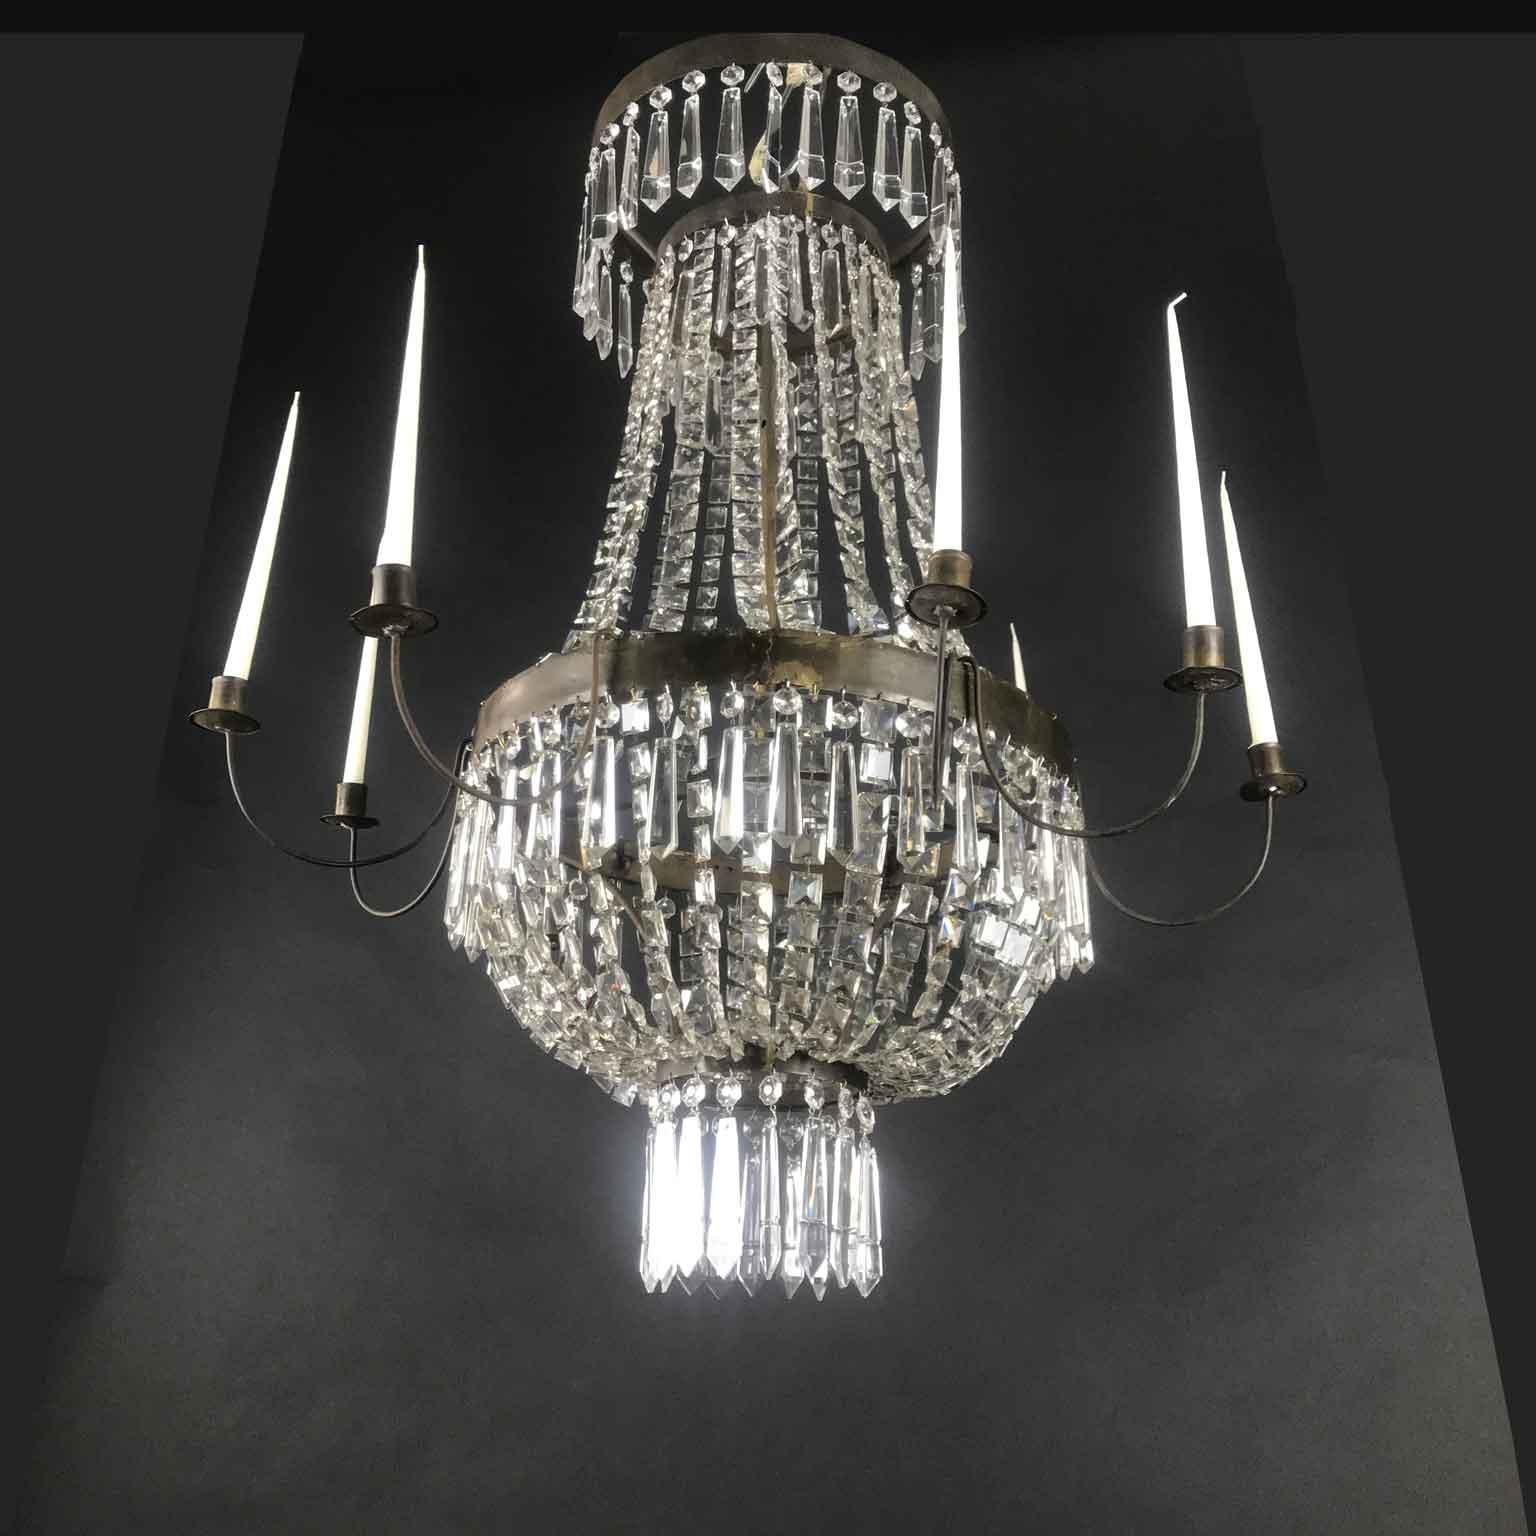 19th Century Italian Empire Crystal Candle Chandelier For Sale 9